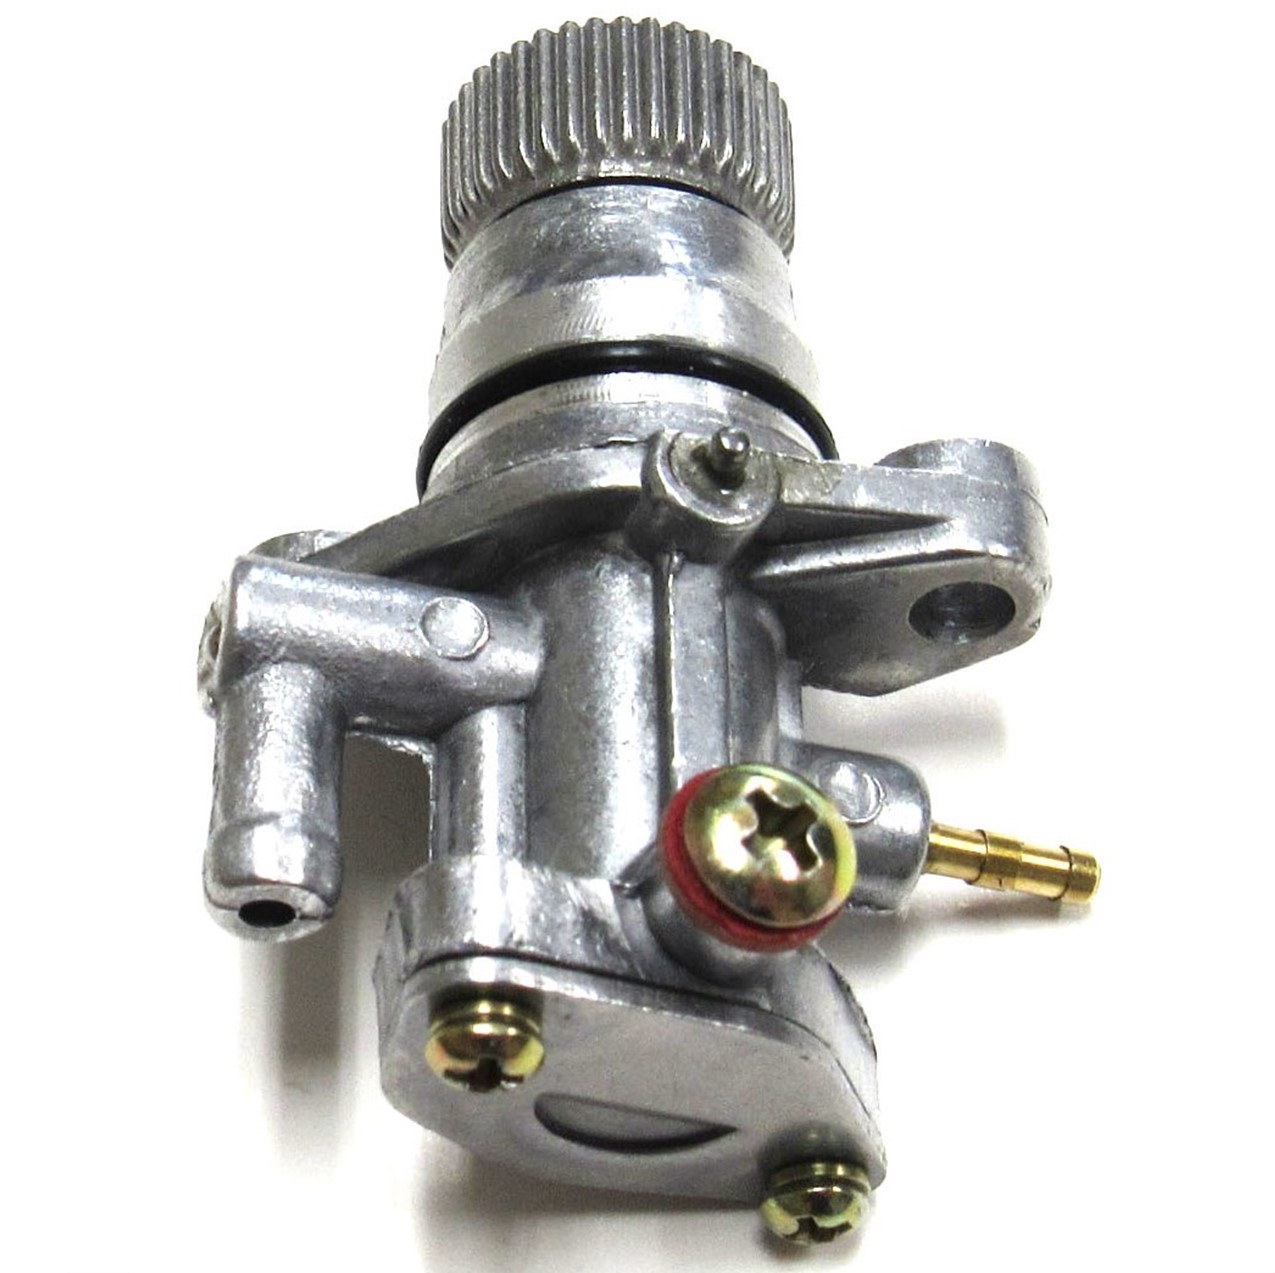 Oil Pump 2 Stroke Non-Cable Operated Fits many 50cc, 70cc & 90cc ATV's and Scooters with the Minarelli Jog Engine - Click Image to Close